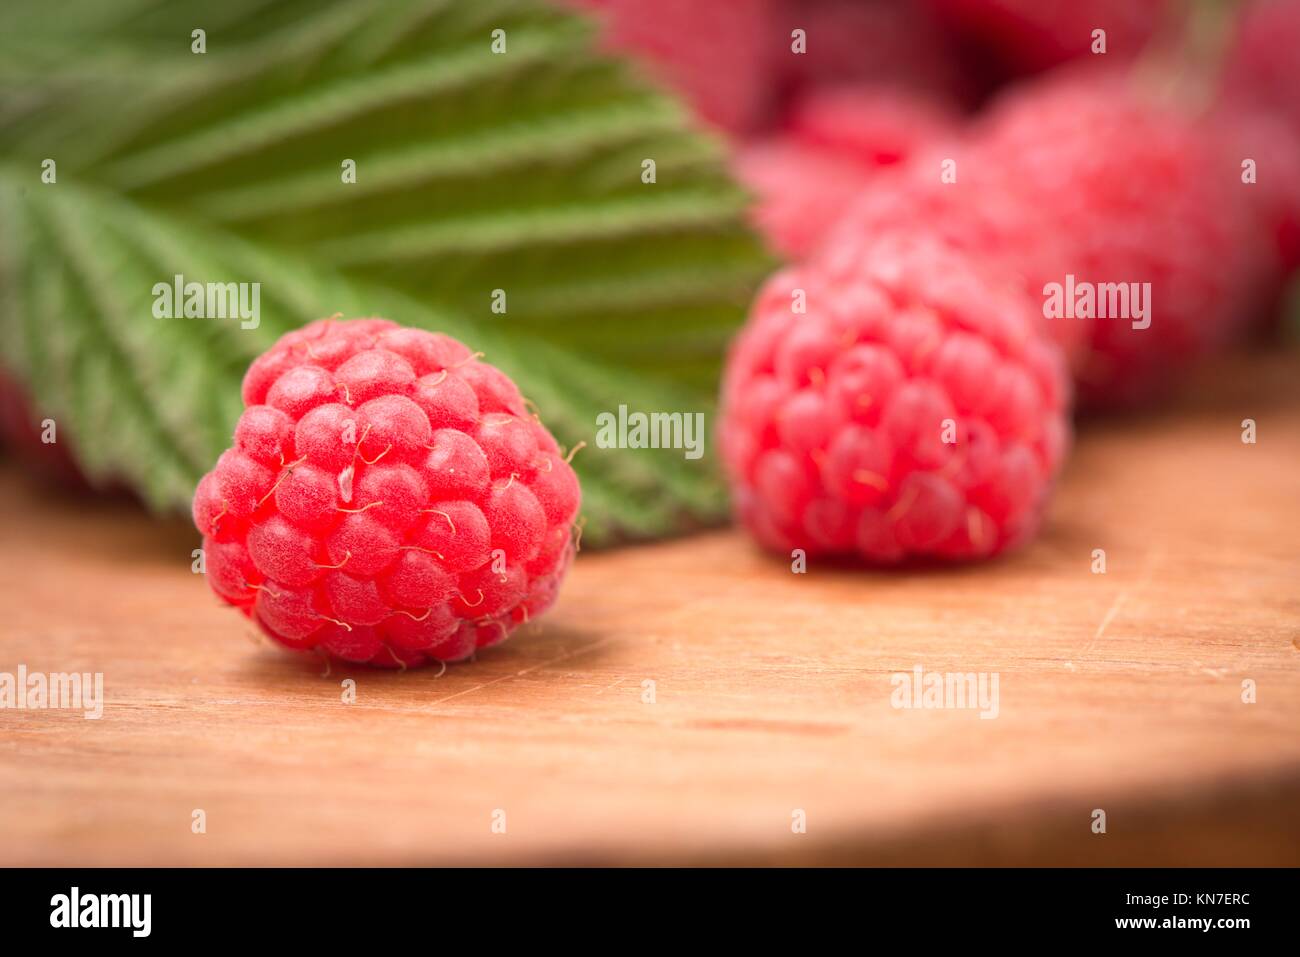 Raspberries in close-up. They are fresh, ripe and red. Tasty food image with juicy berries. Stock Photo